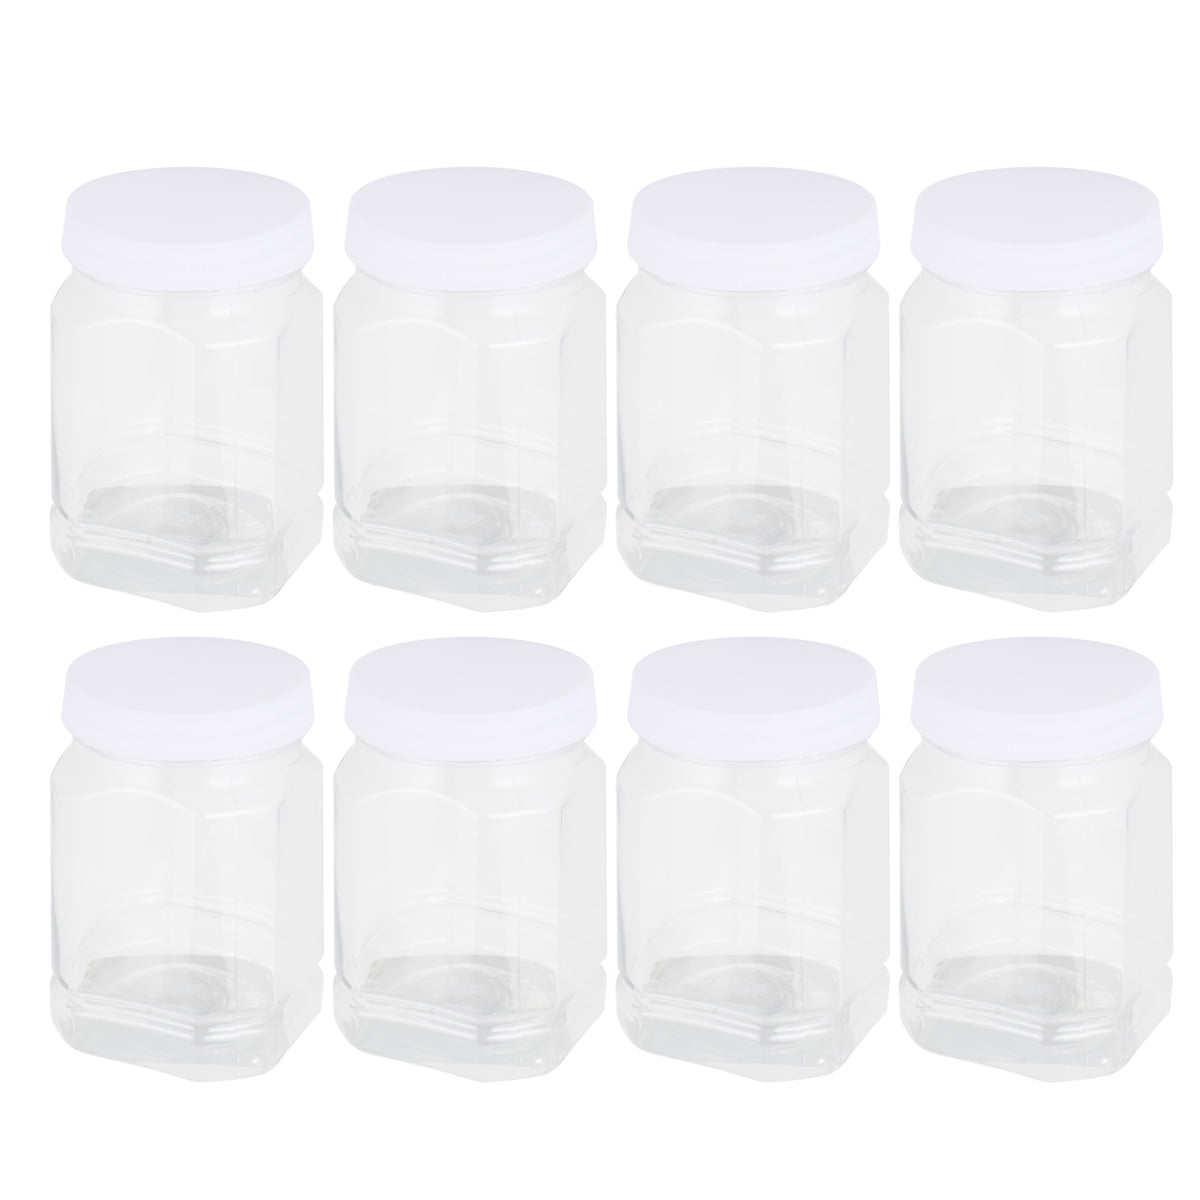 Okllen 4 Pack 80 FL Oz 5/8 Gallon Clear Plastic Jars with Lids, Large Empty  Storage Gallon Containers Round Canisters for Nut, Snack, Honey, Jam, Dry